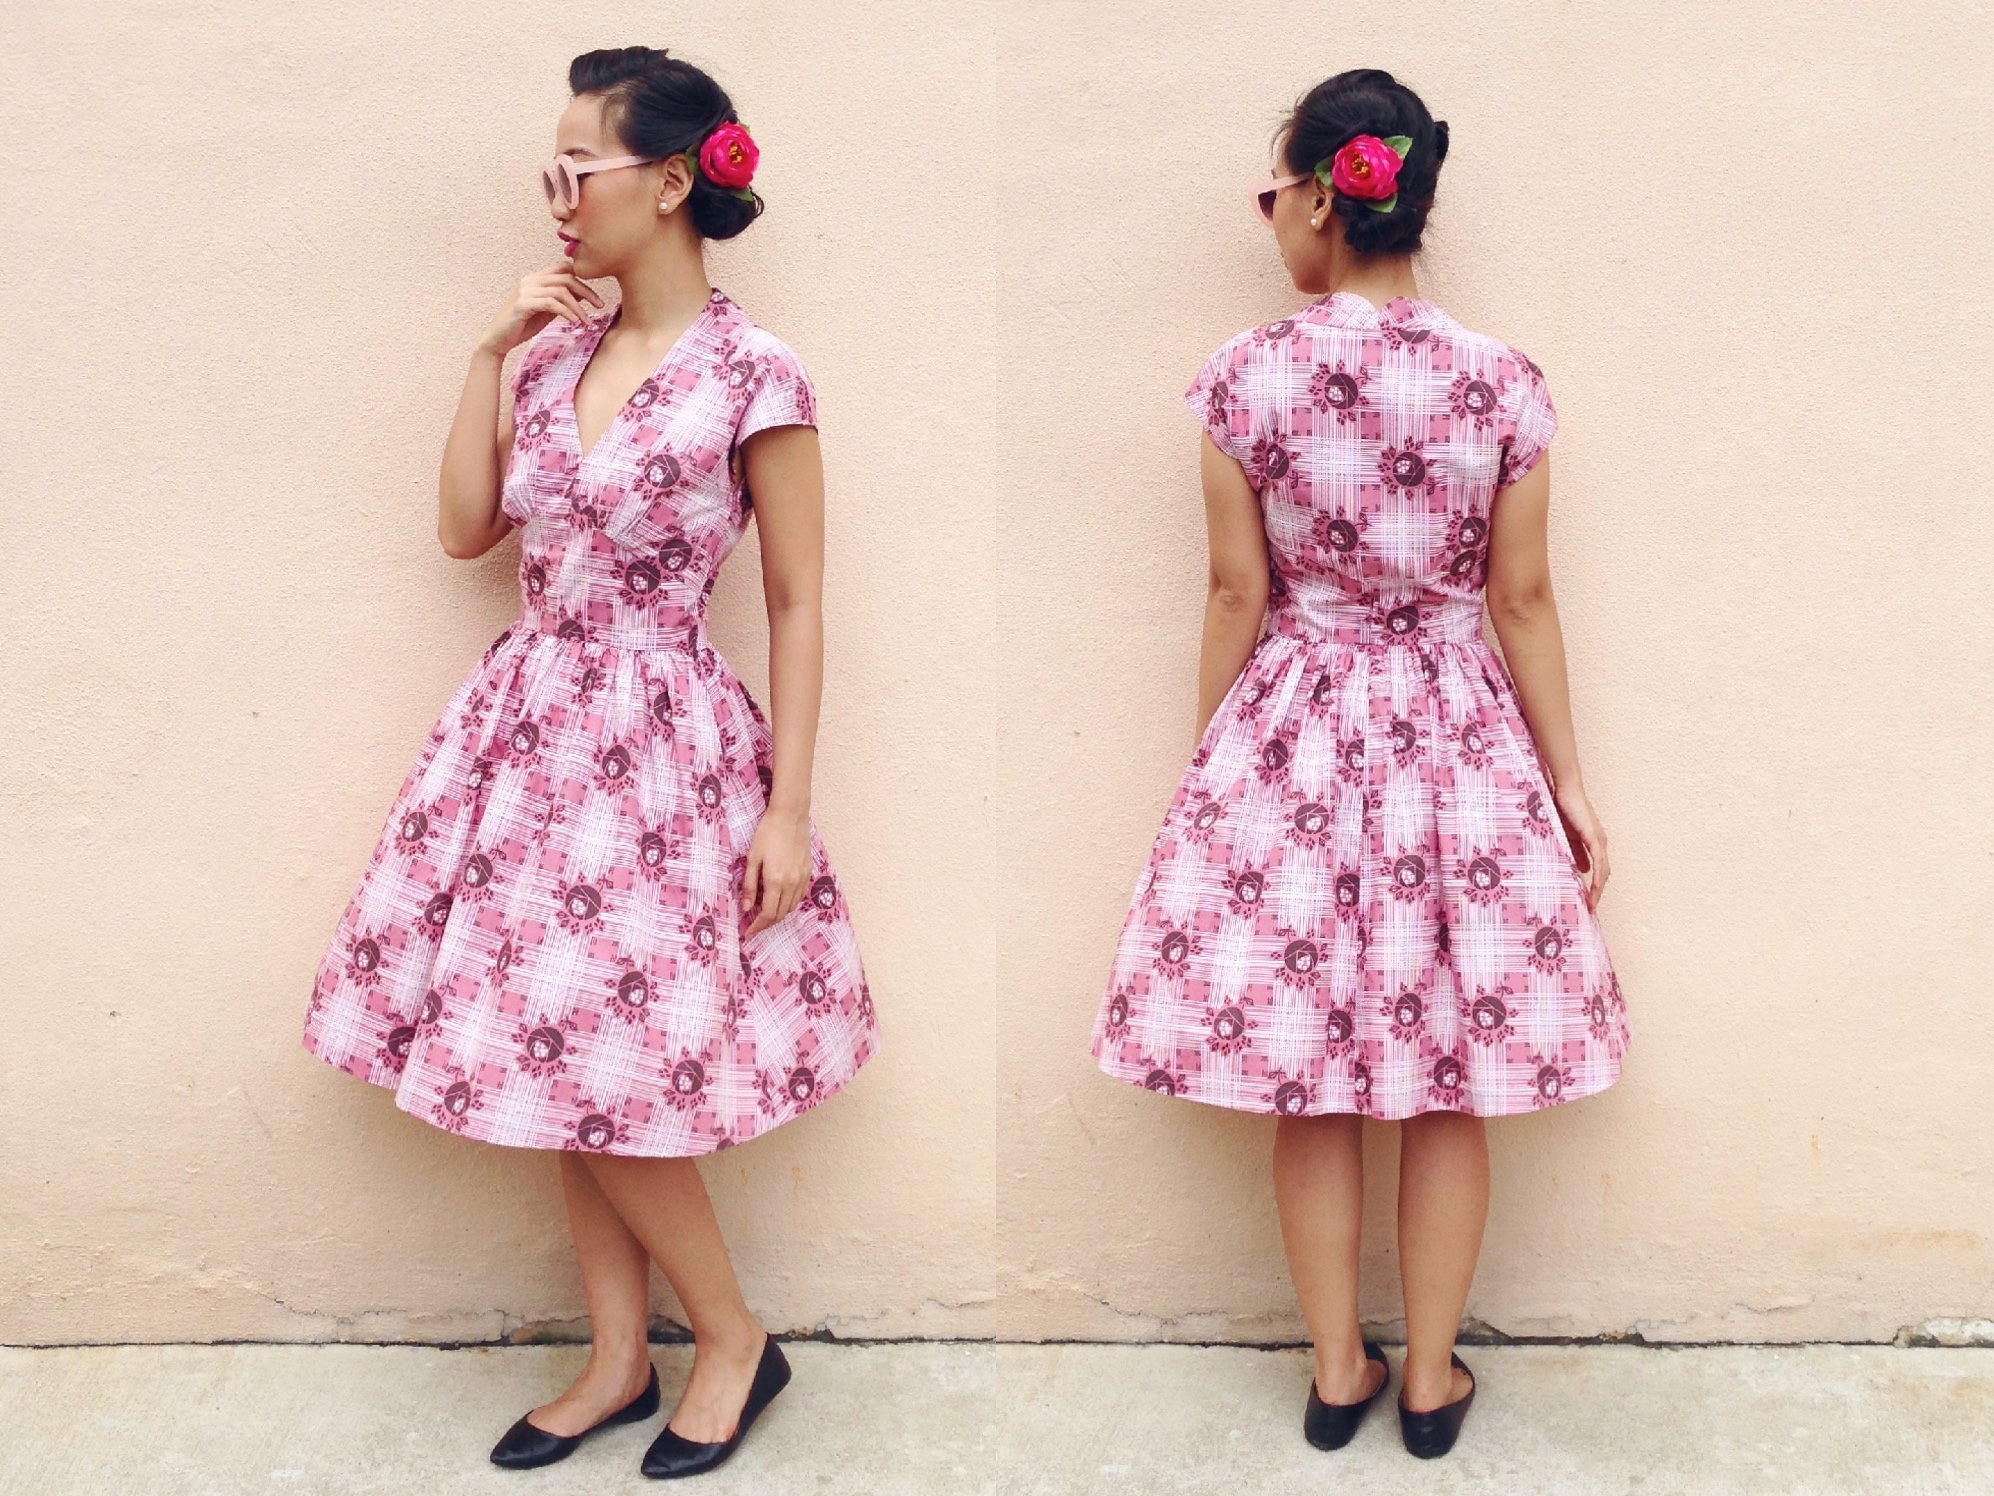 Sonya Retro 50's Styled Dress | Recollections